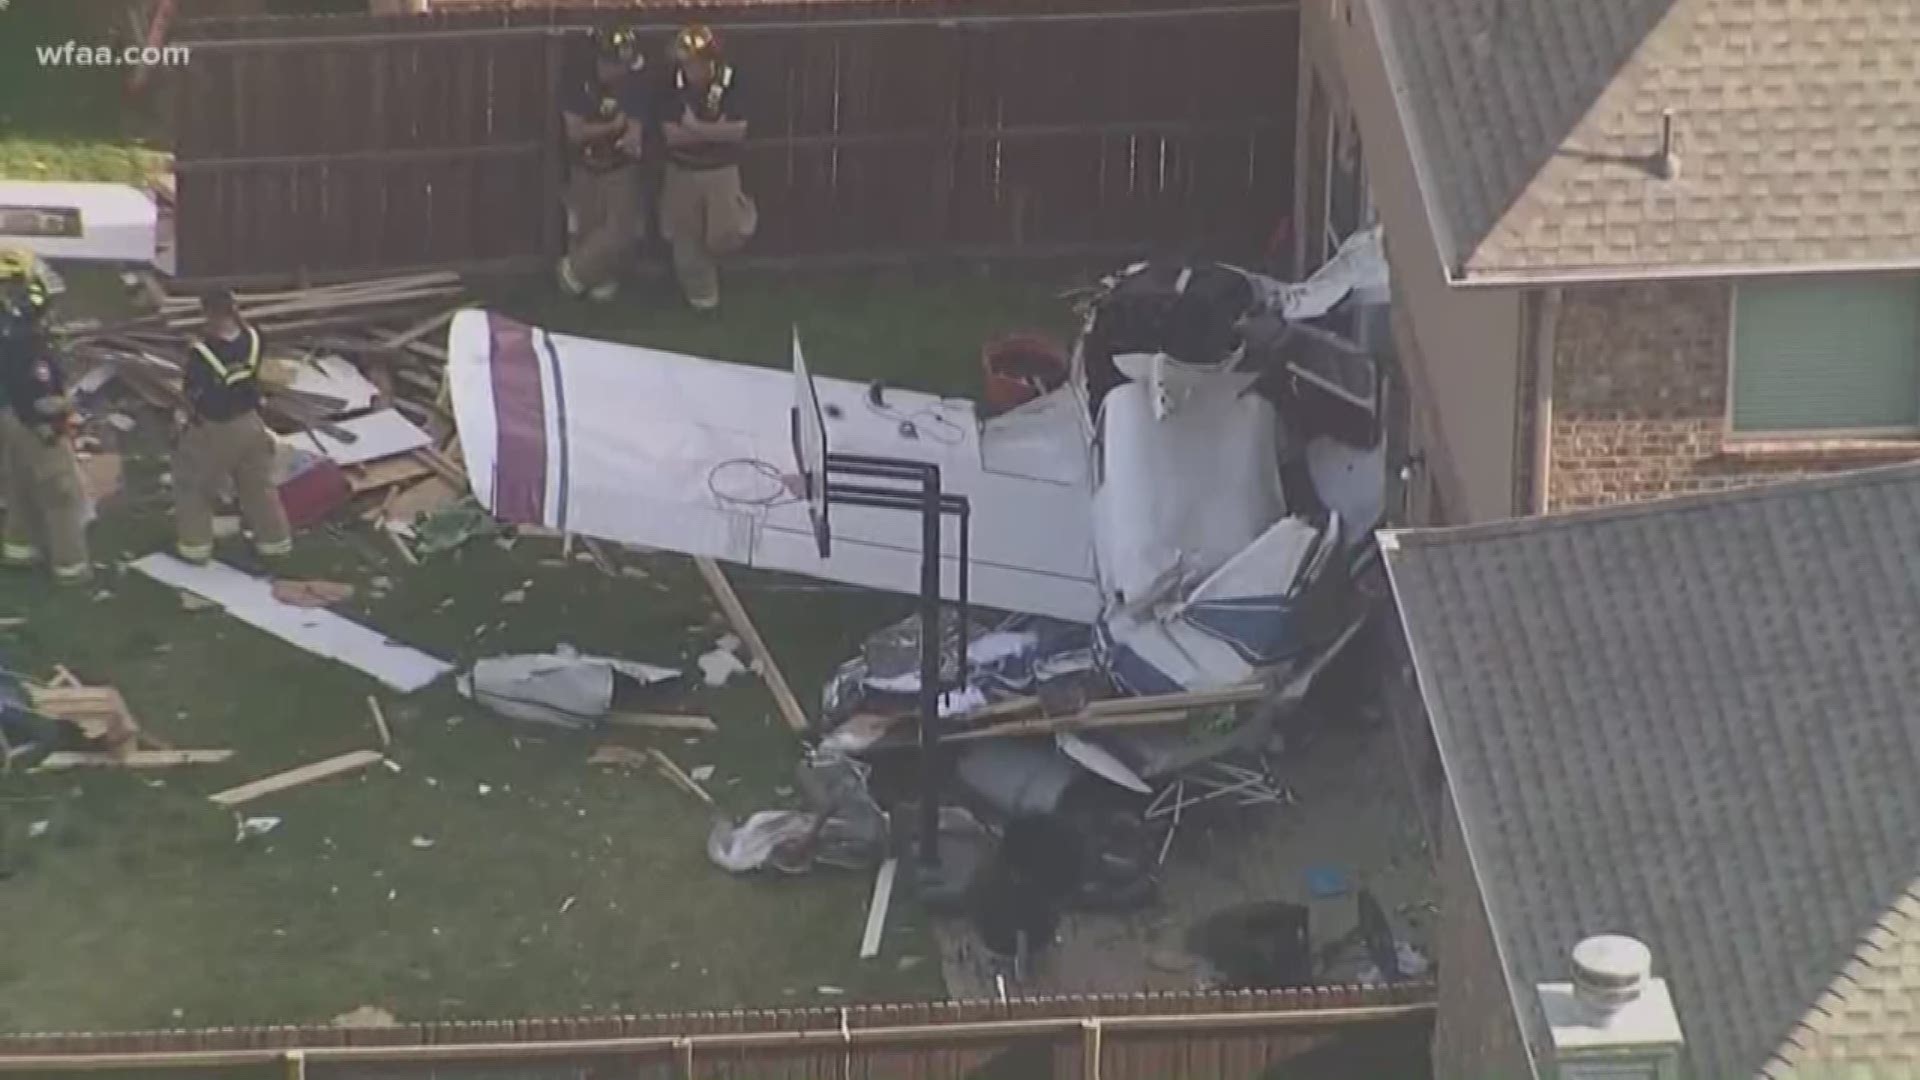 Two people were inside a McKinney home when a plane crashed into the back. No one on the ground was injured, but two on board were taken to a hospital.